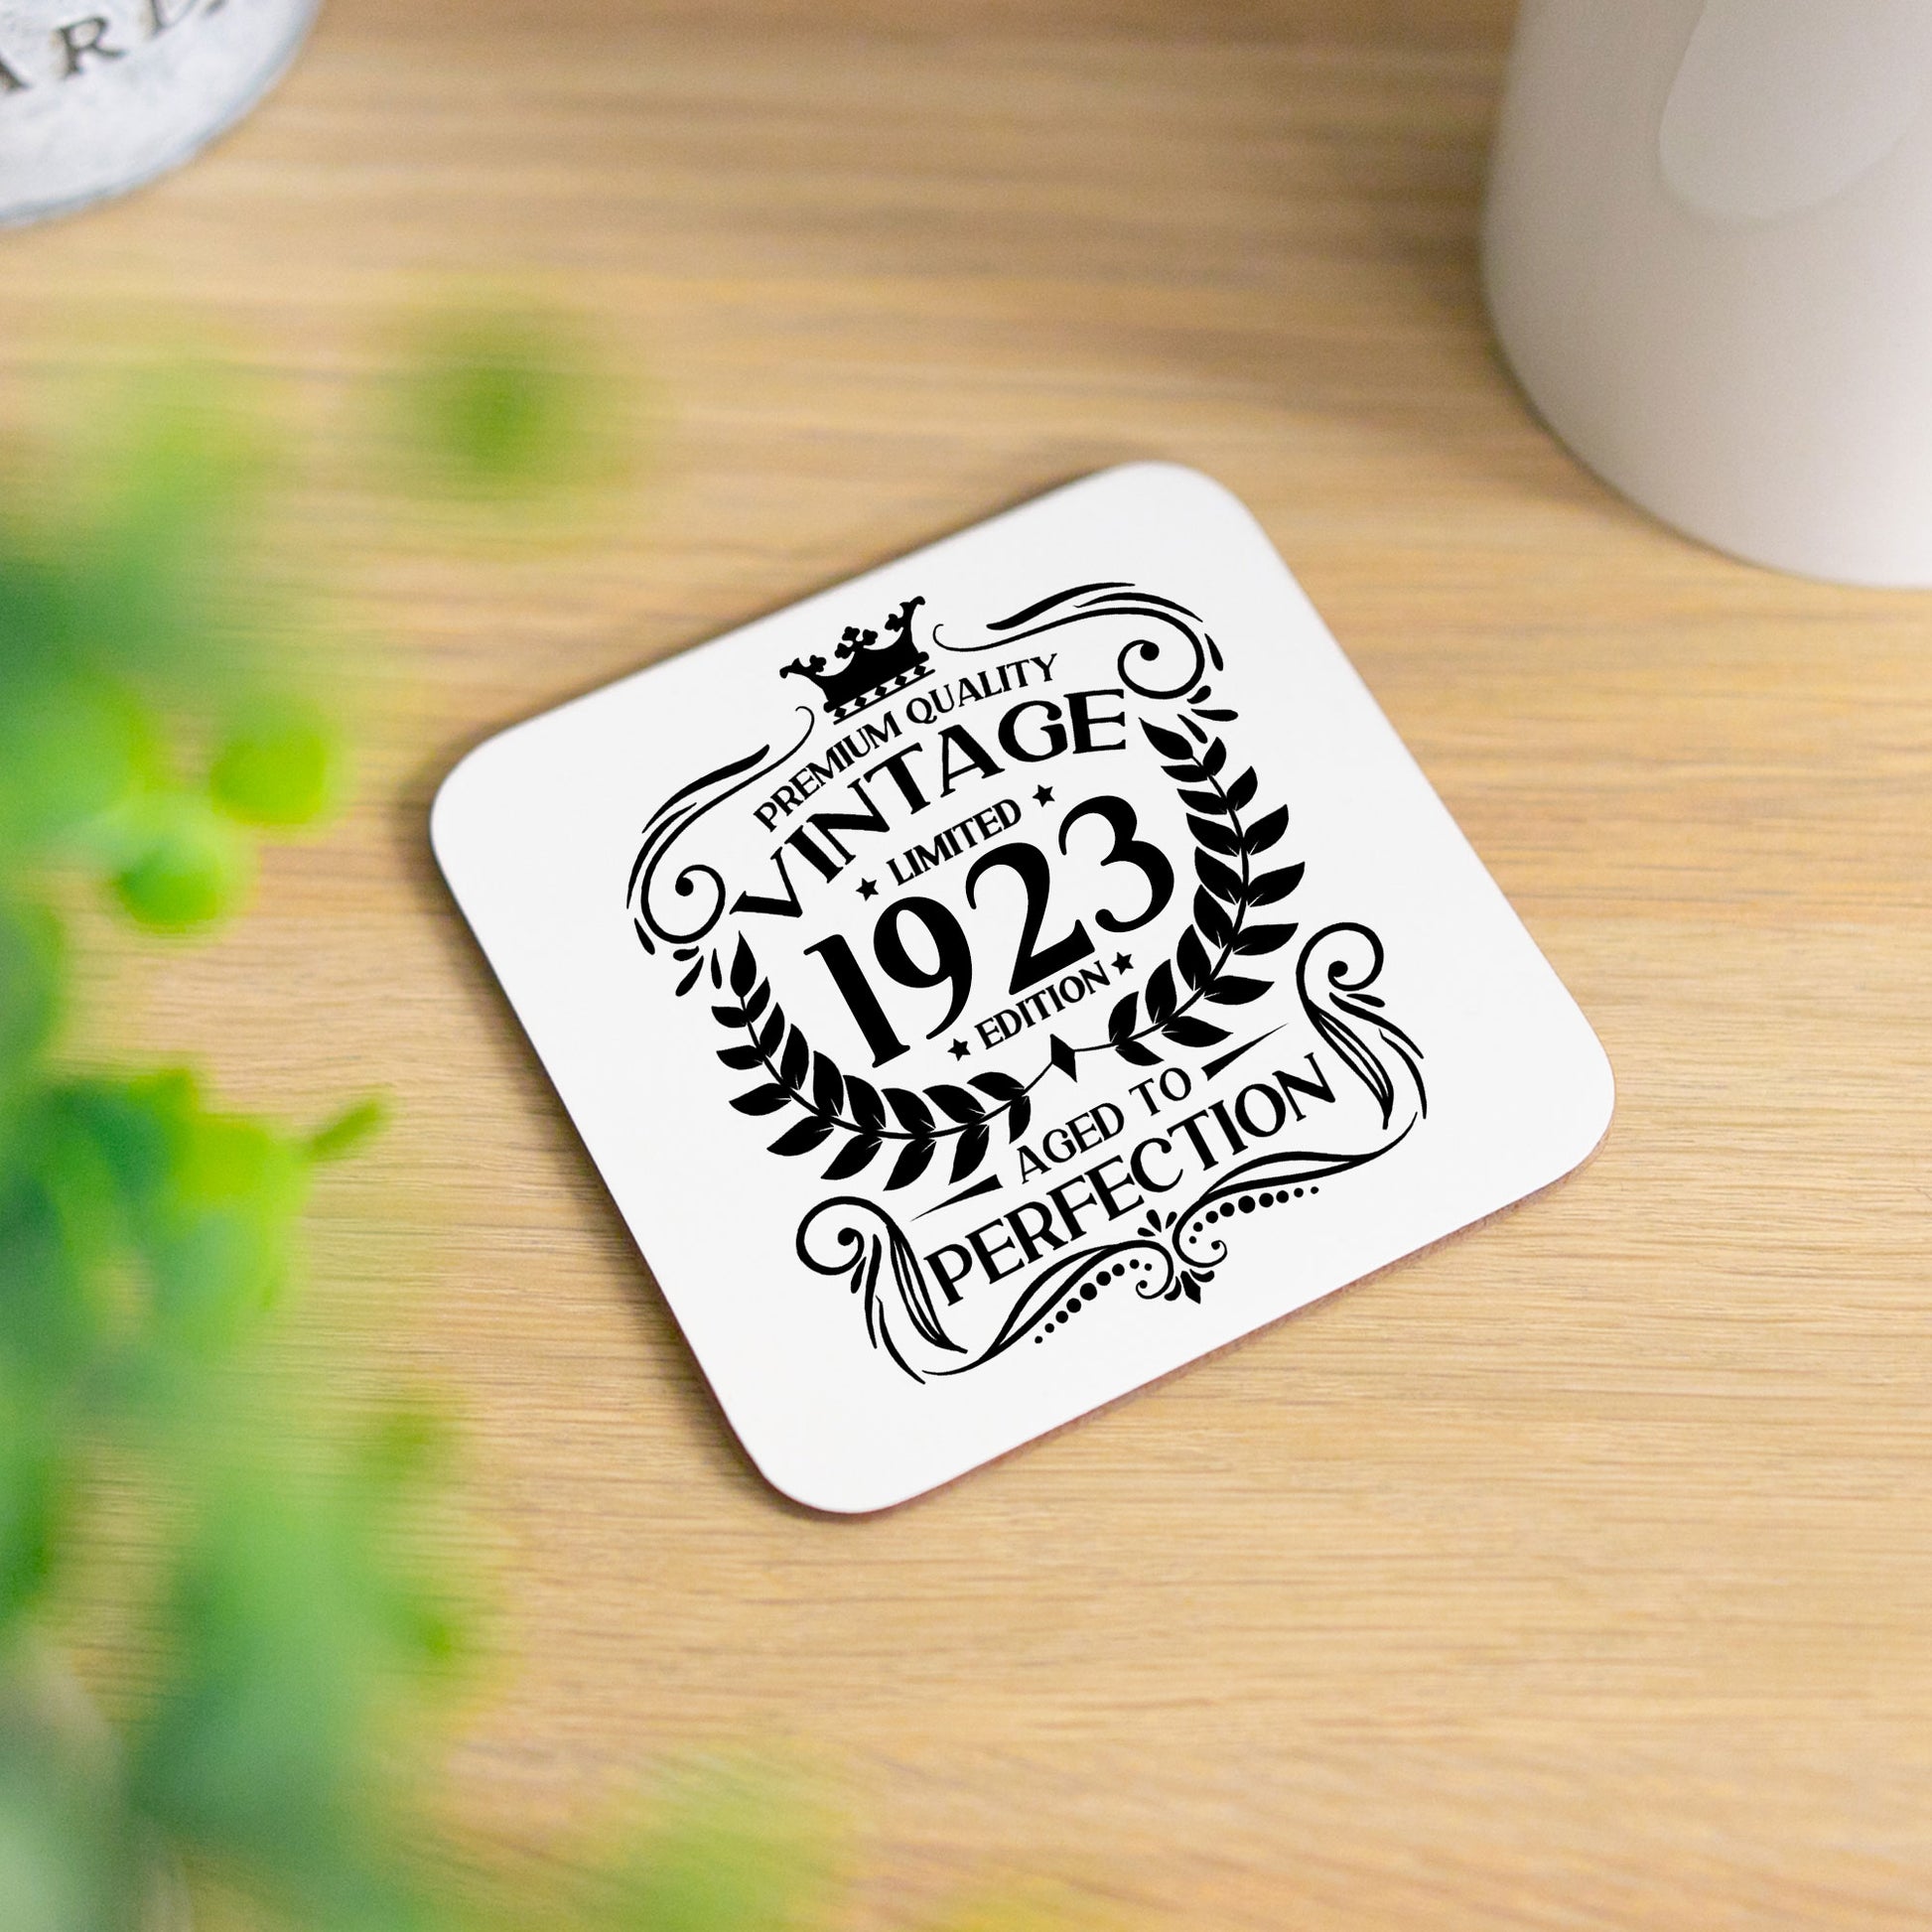 Vintage 1923 100th Birthday Engraved Wine Glass Gift  - Always Looking Good - Glass & Printed Coaster  